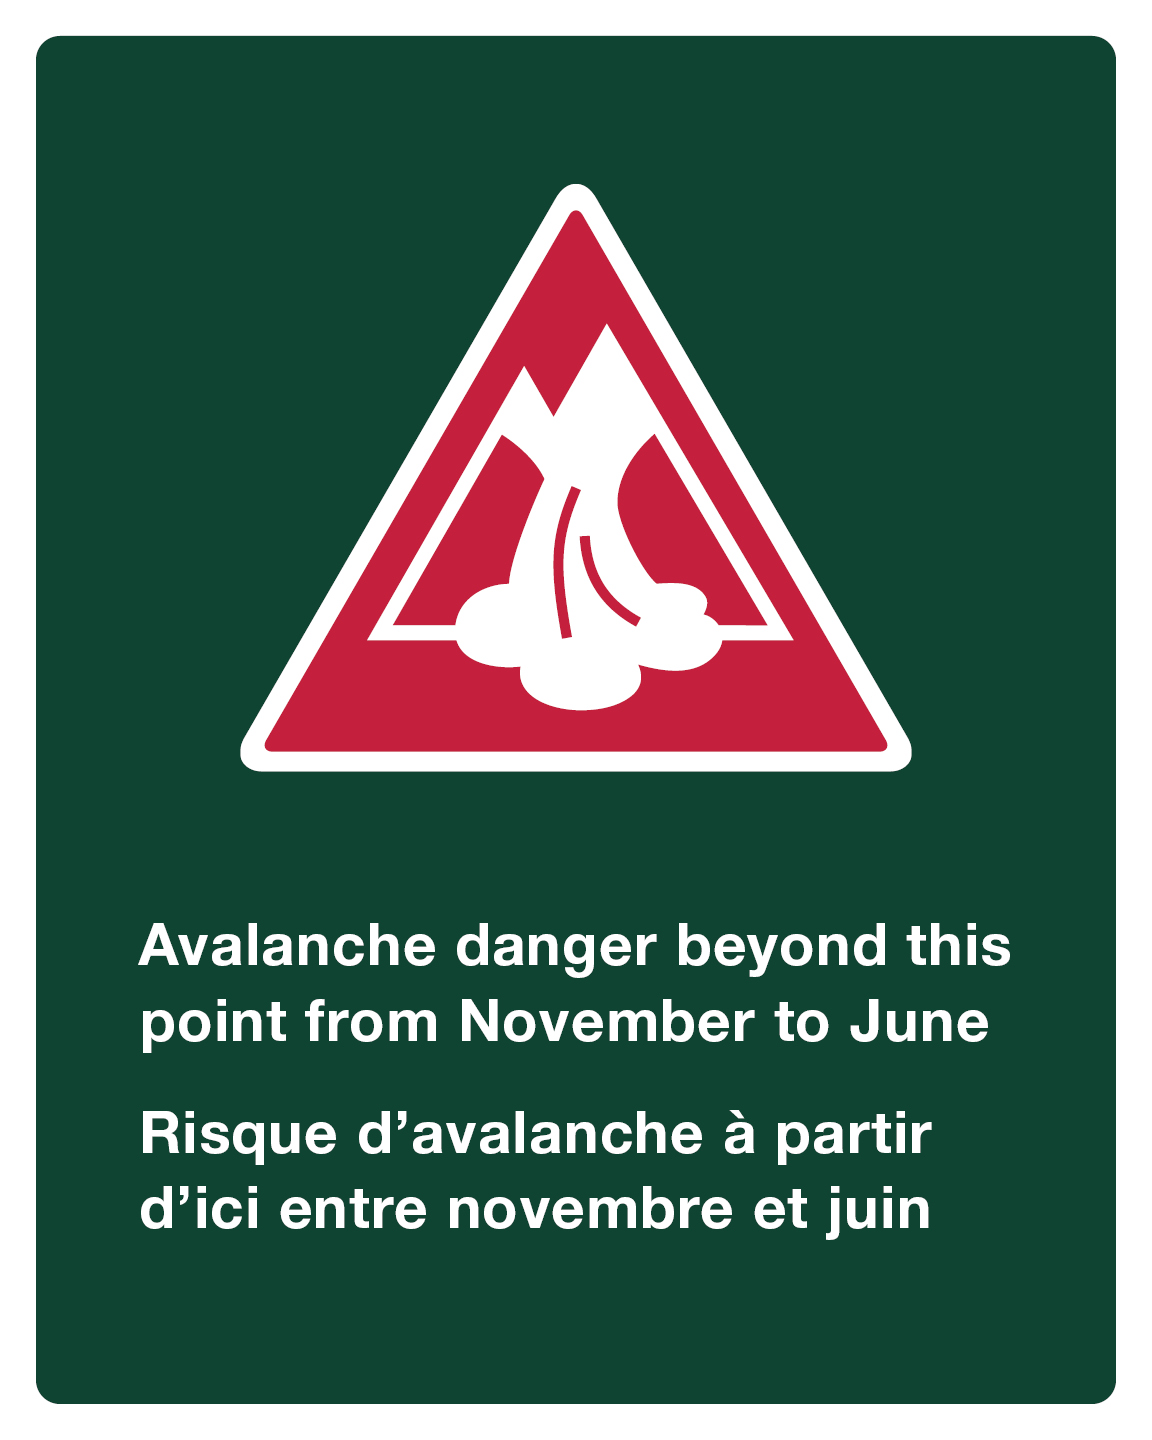 Sign indicating an avalanche risk zone.